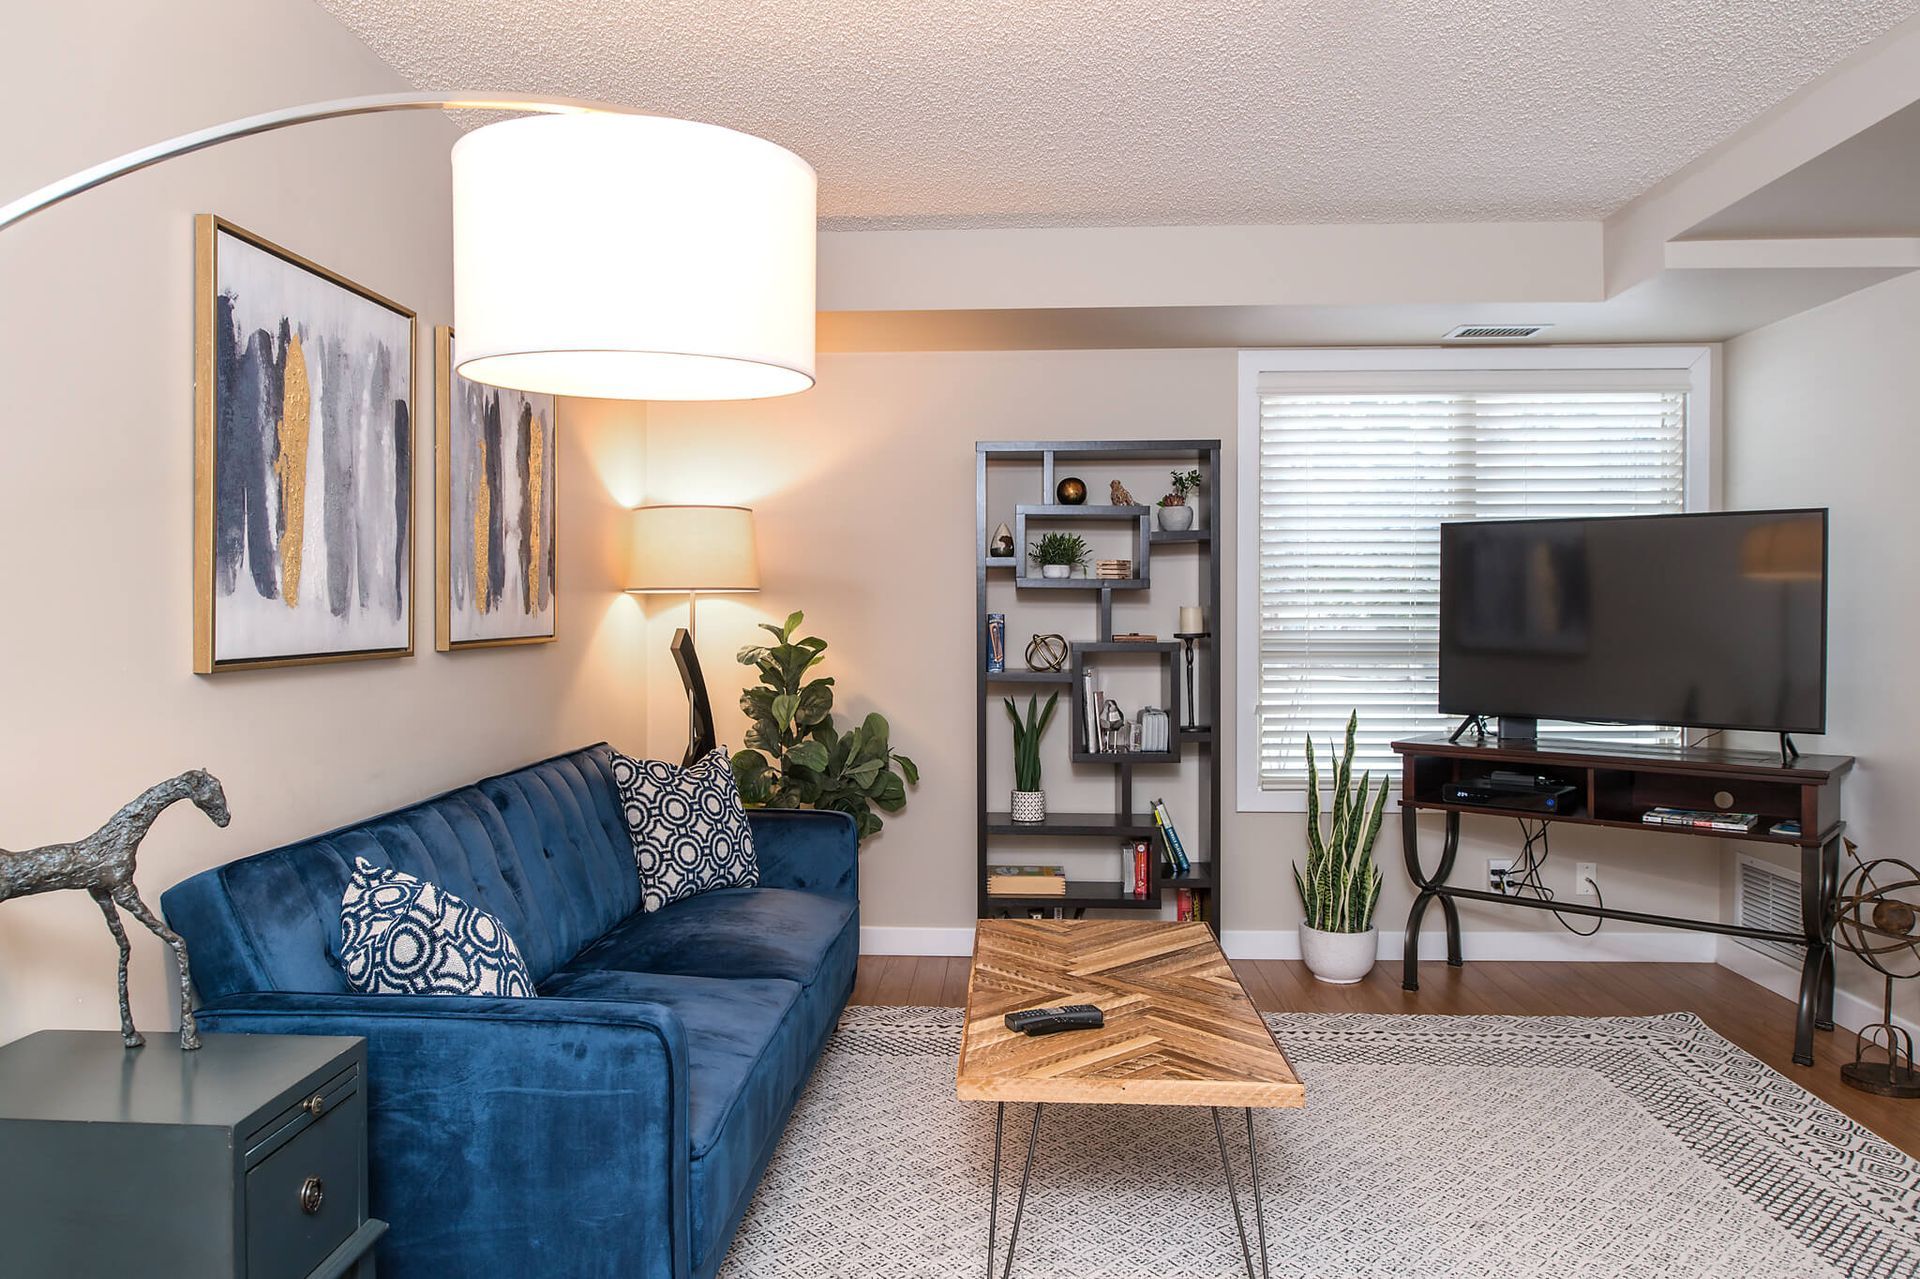 Living room of the Sapphire Serenity, a BC Vacation Rental hosted by Aisling Baile Property Management.